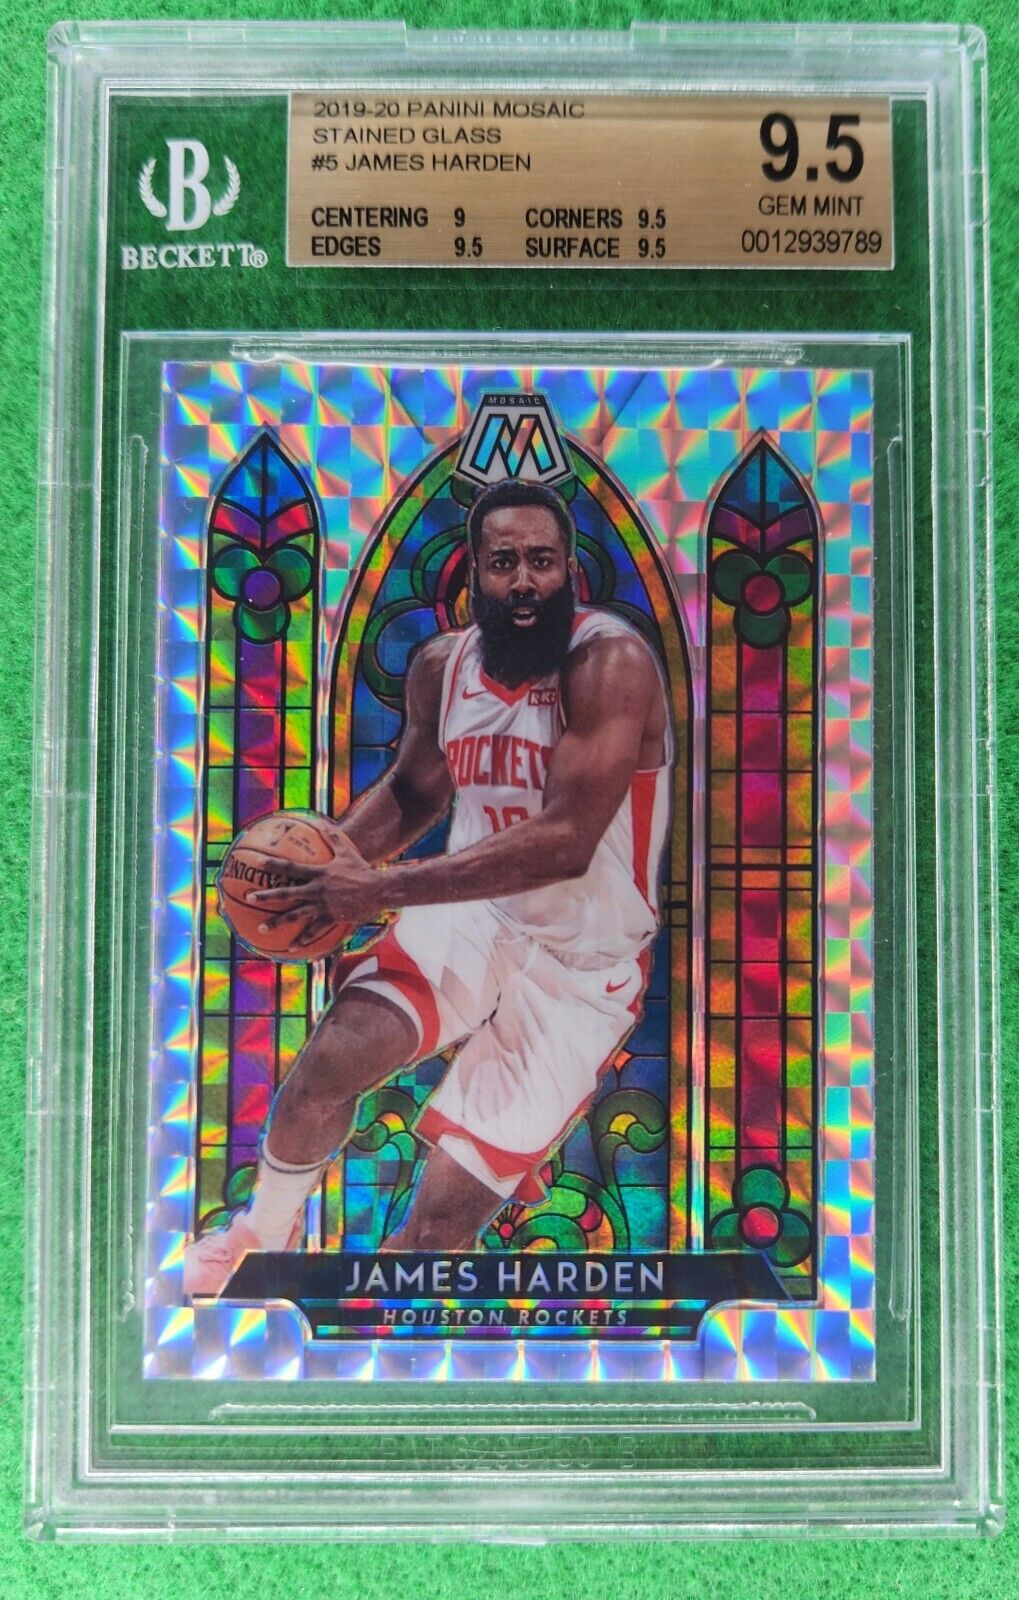 JAMES HARDEN - 2019-20 Mosaic Stained Glass SSP - BGS 9.5